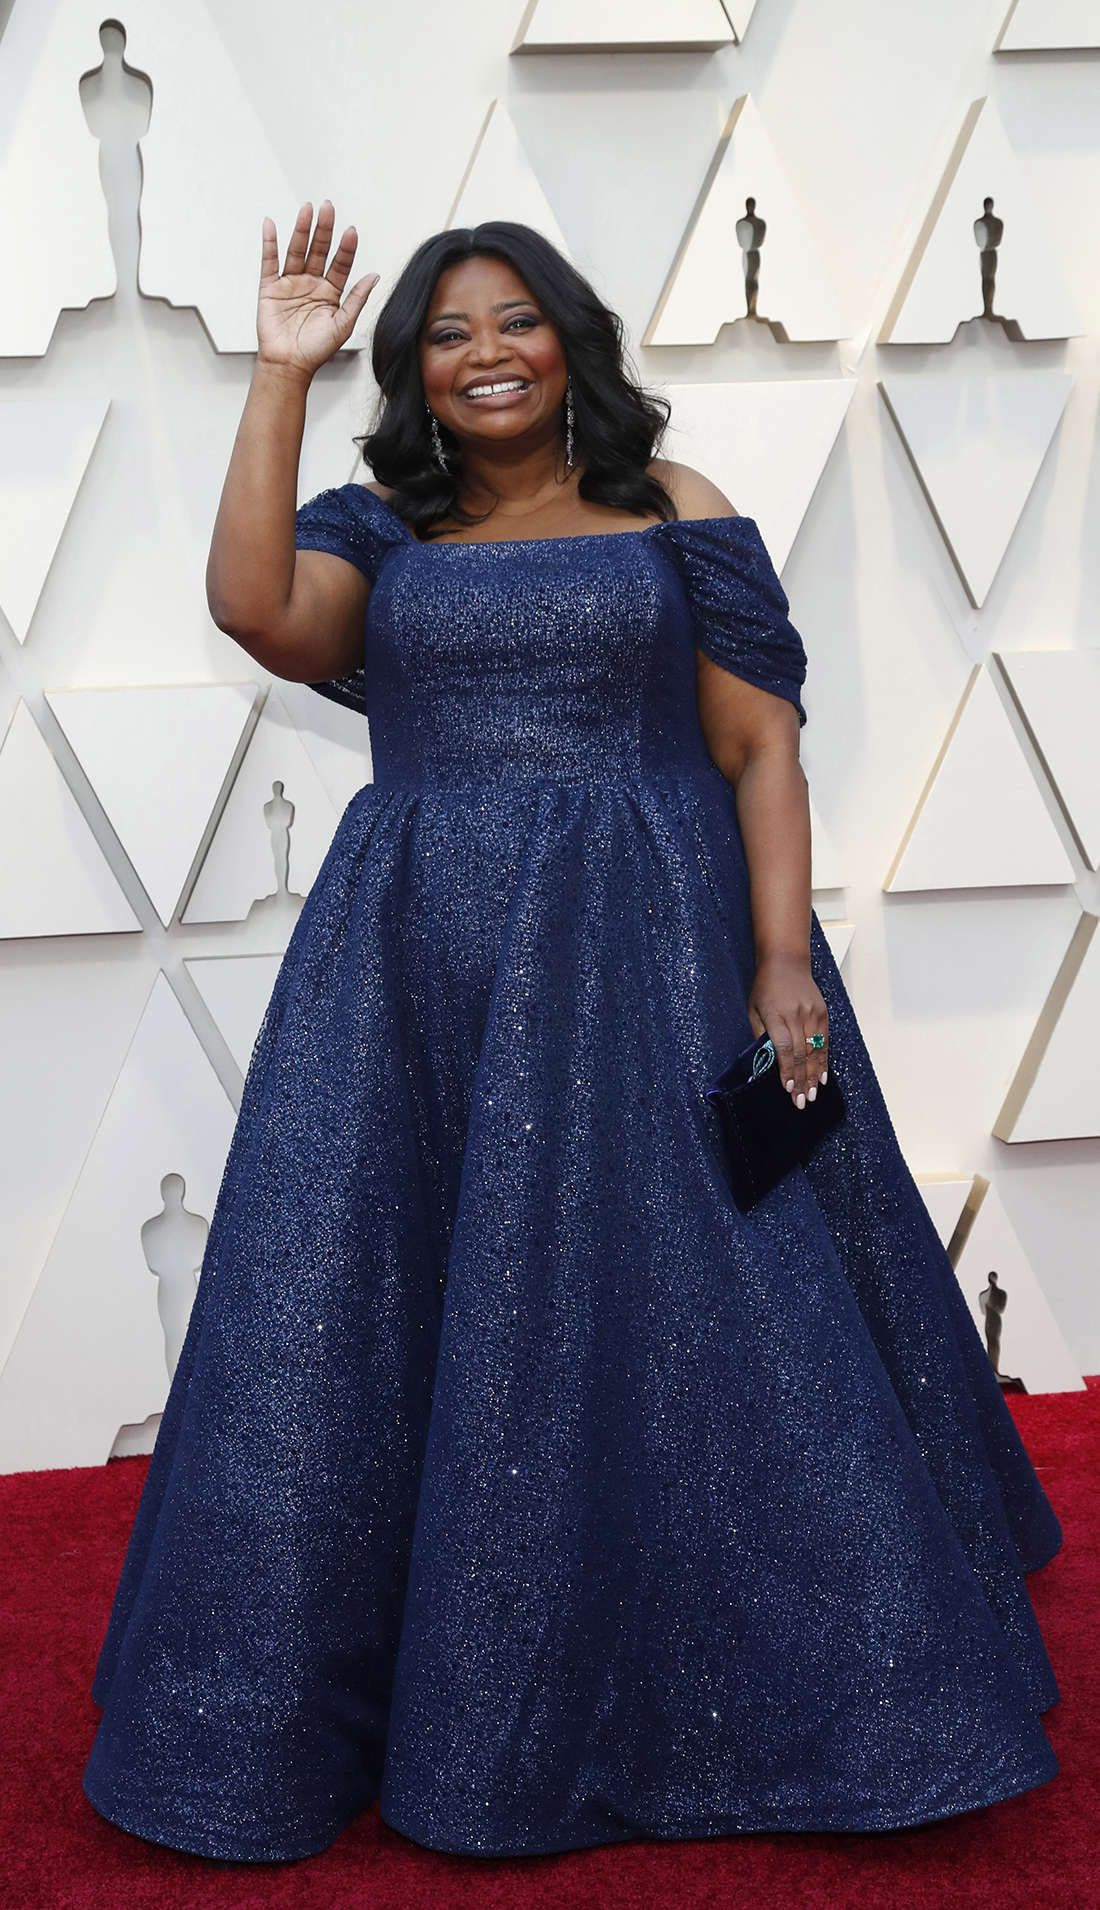 Oscars 2019: Red Carpet pictures from the 91st Academy Awards